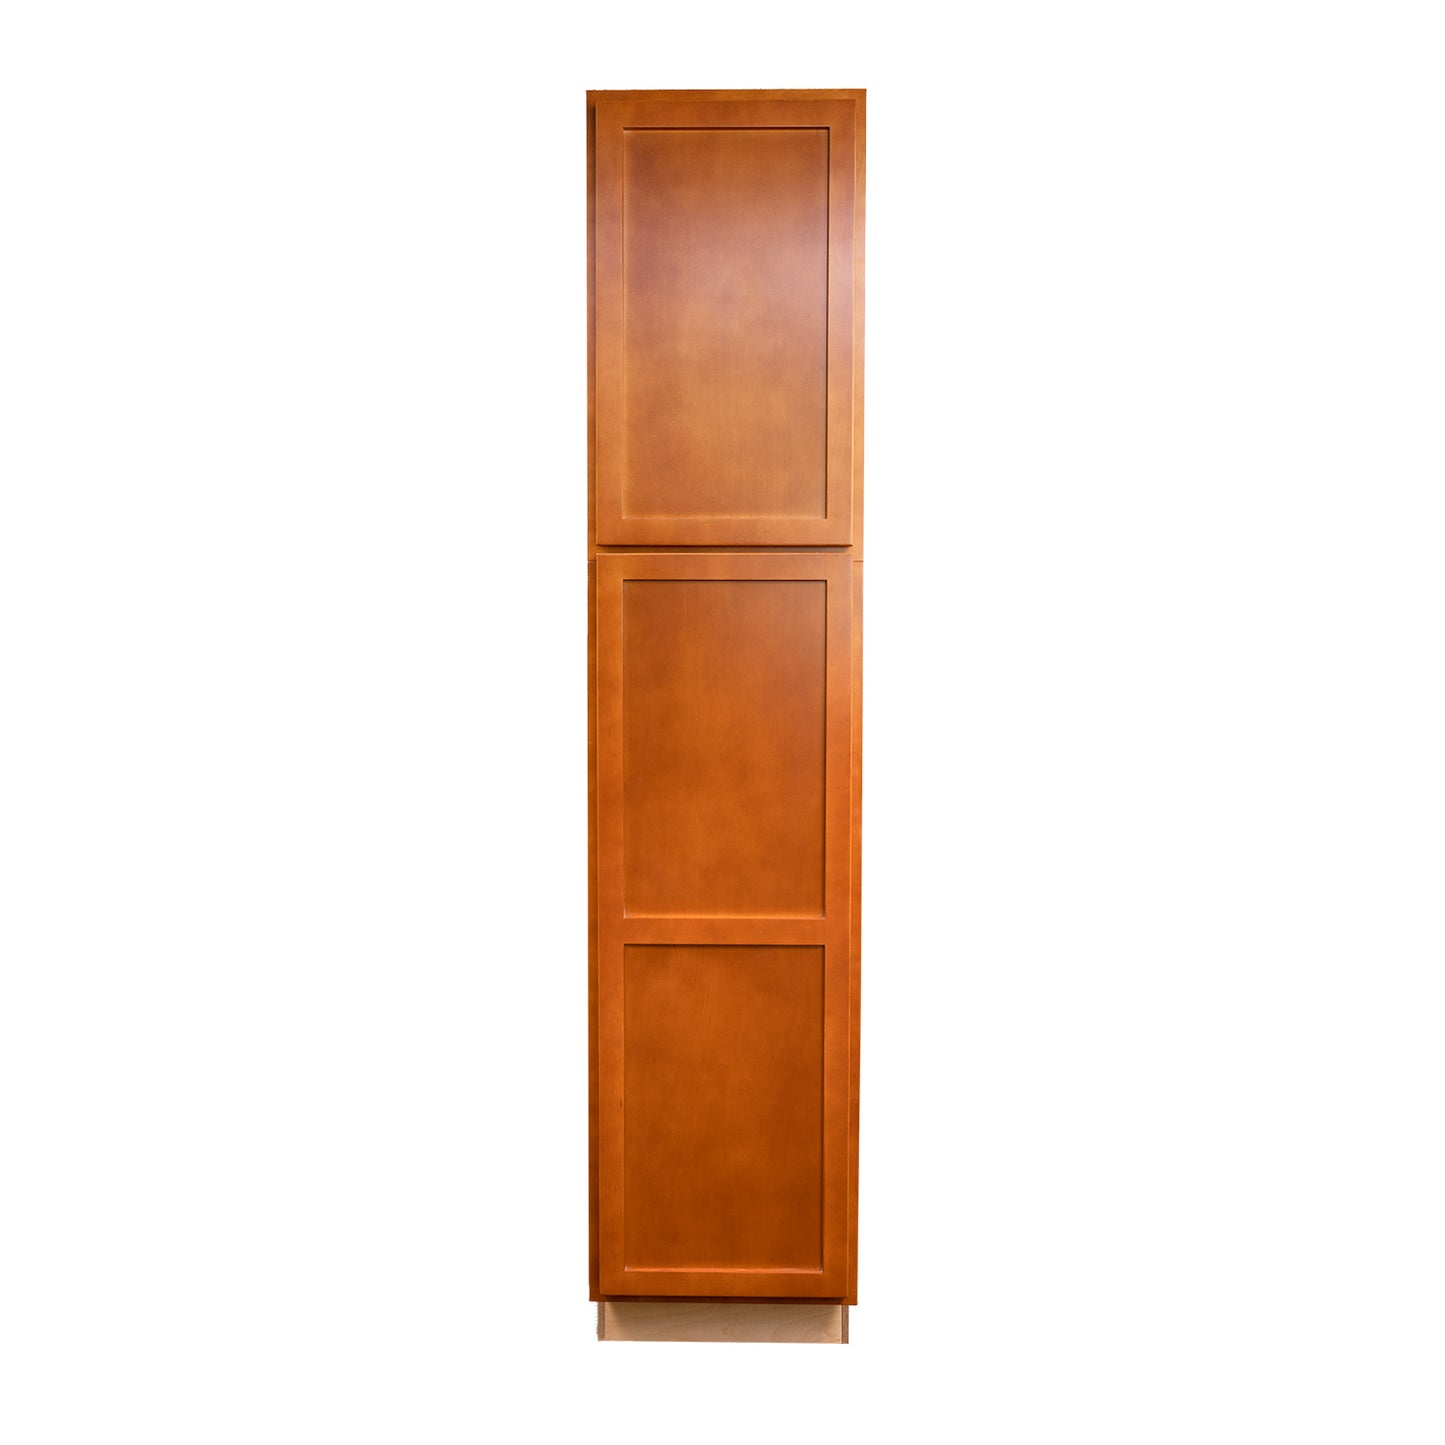 Quicklock RTA (Ready-to-Assemble) Provincial Stain Pantry Cabinet 18"Wx84"Hx24"D